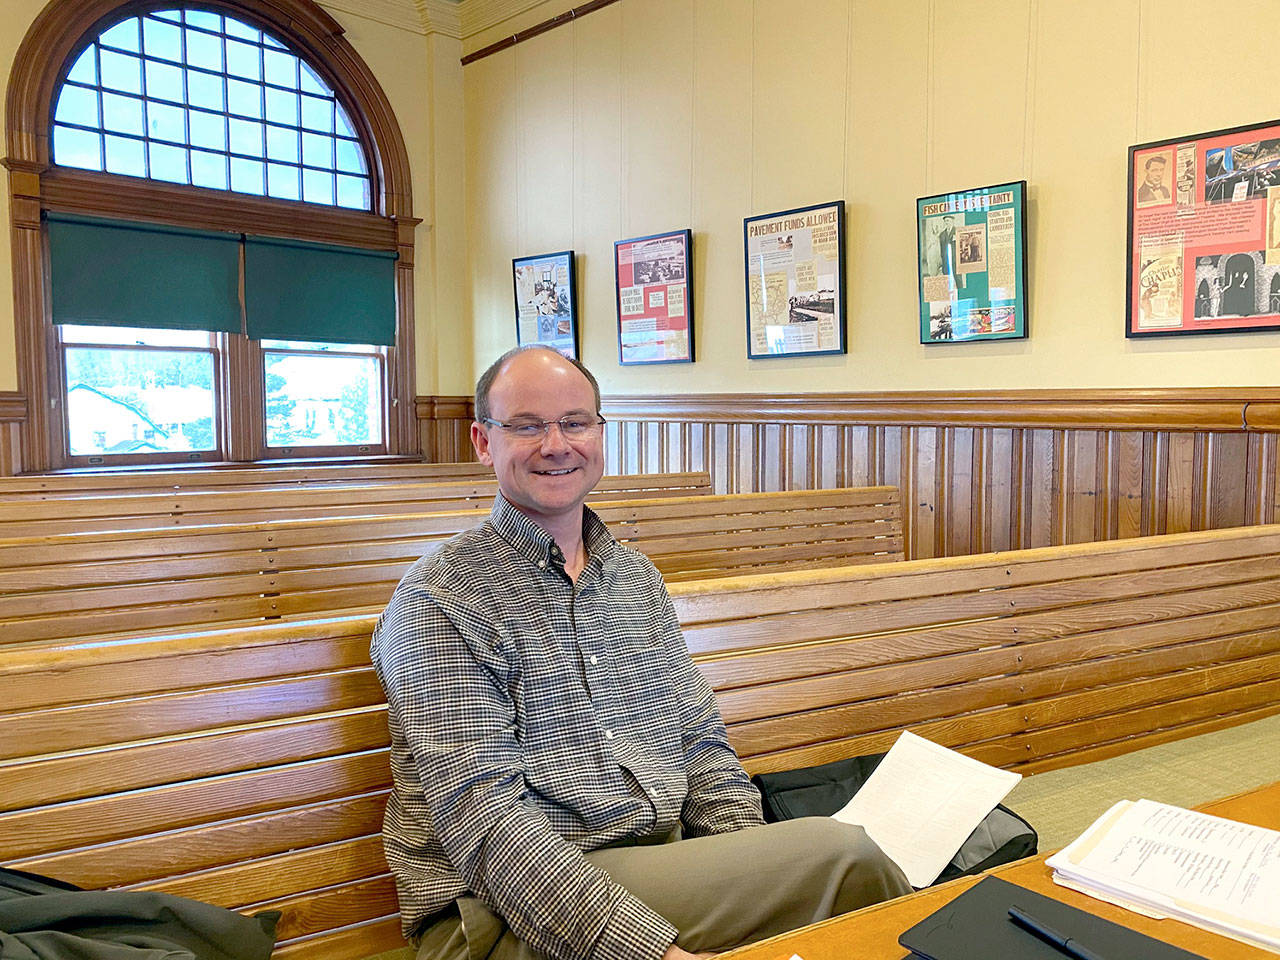 Steve King takes his position as Port Townsend’s new public works director amid a public health crisis. (City of Port Townsend)